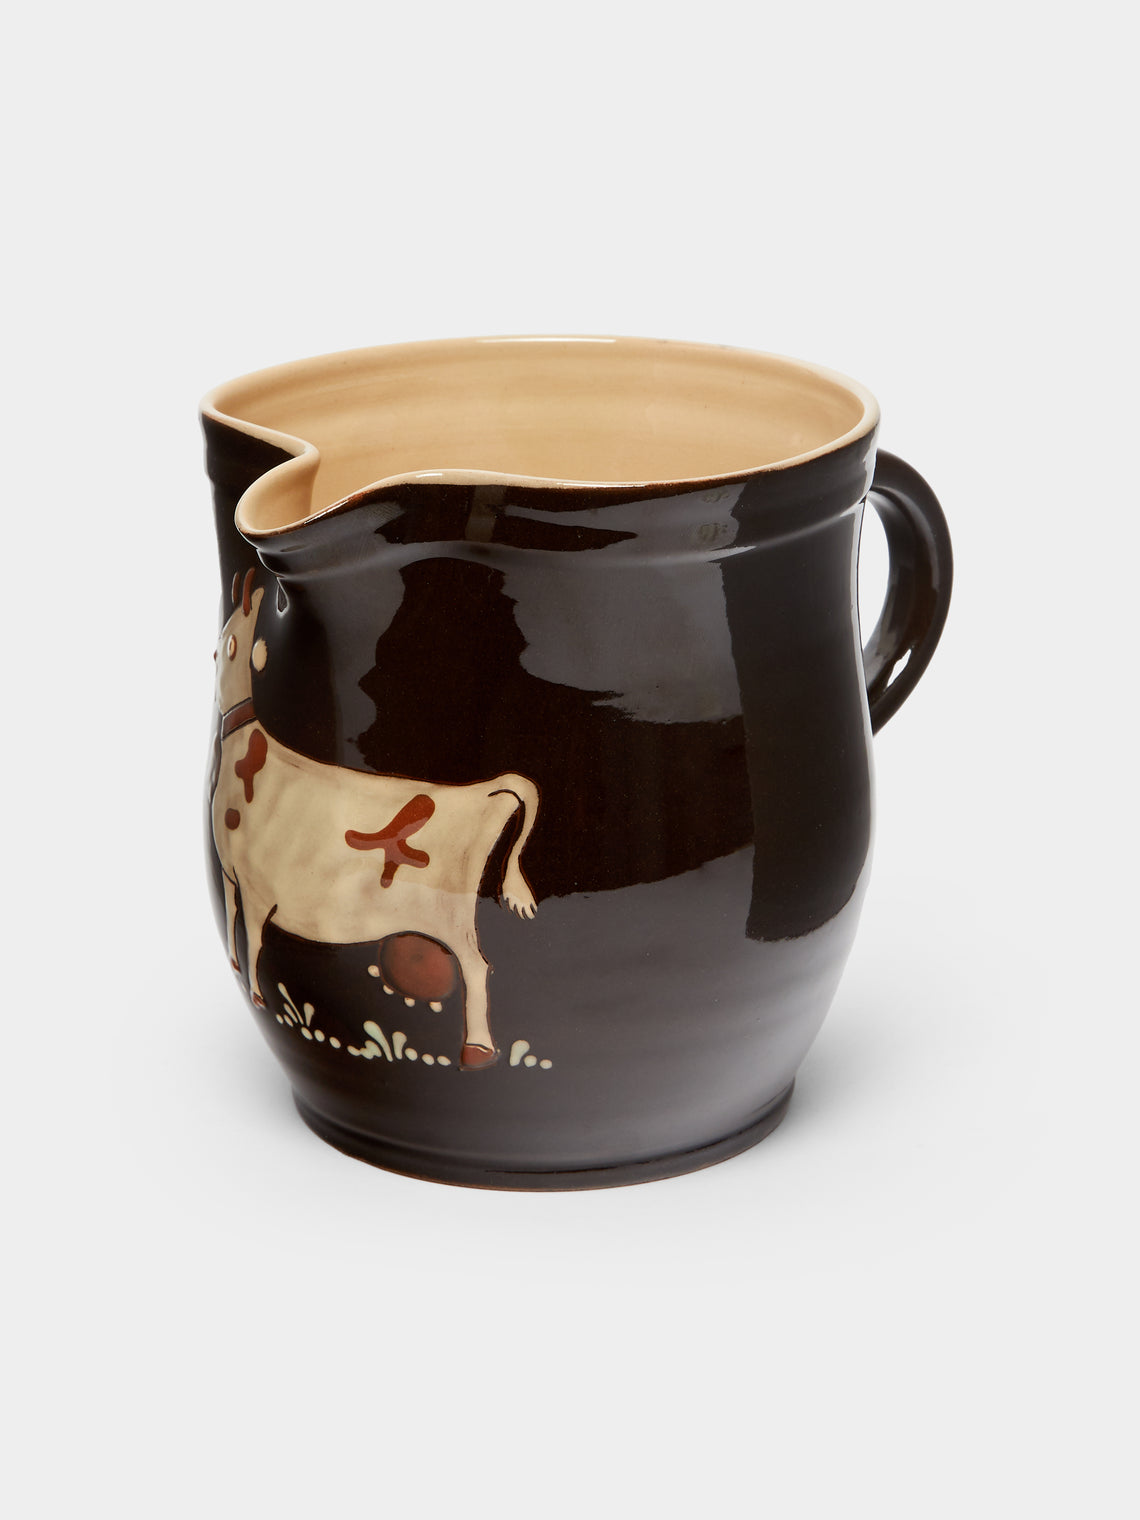 Poterie d’Évires - Cows Hand-Painted Ceramic Rounded Jug -  - ABASK - 